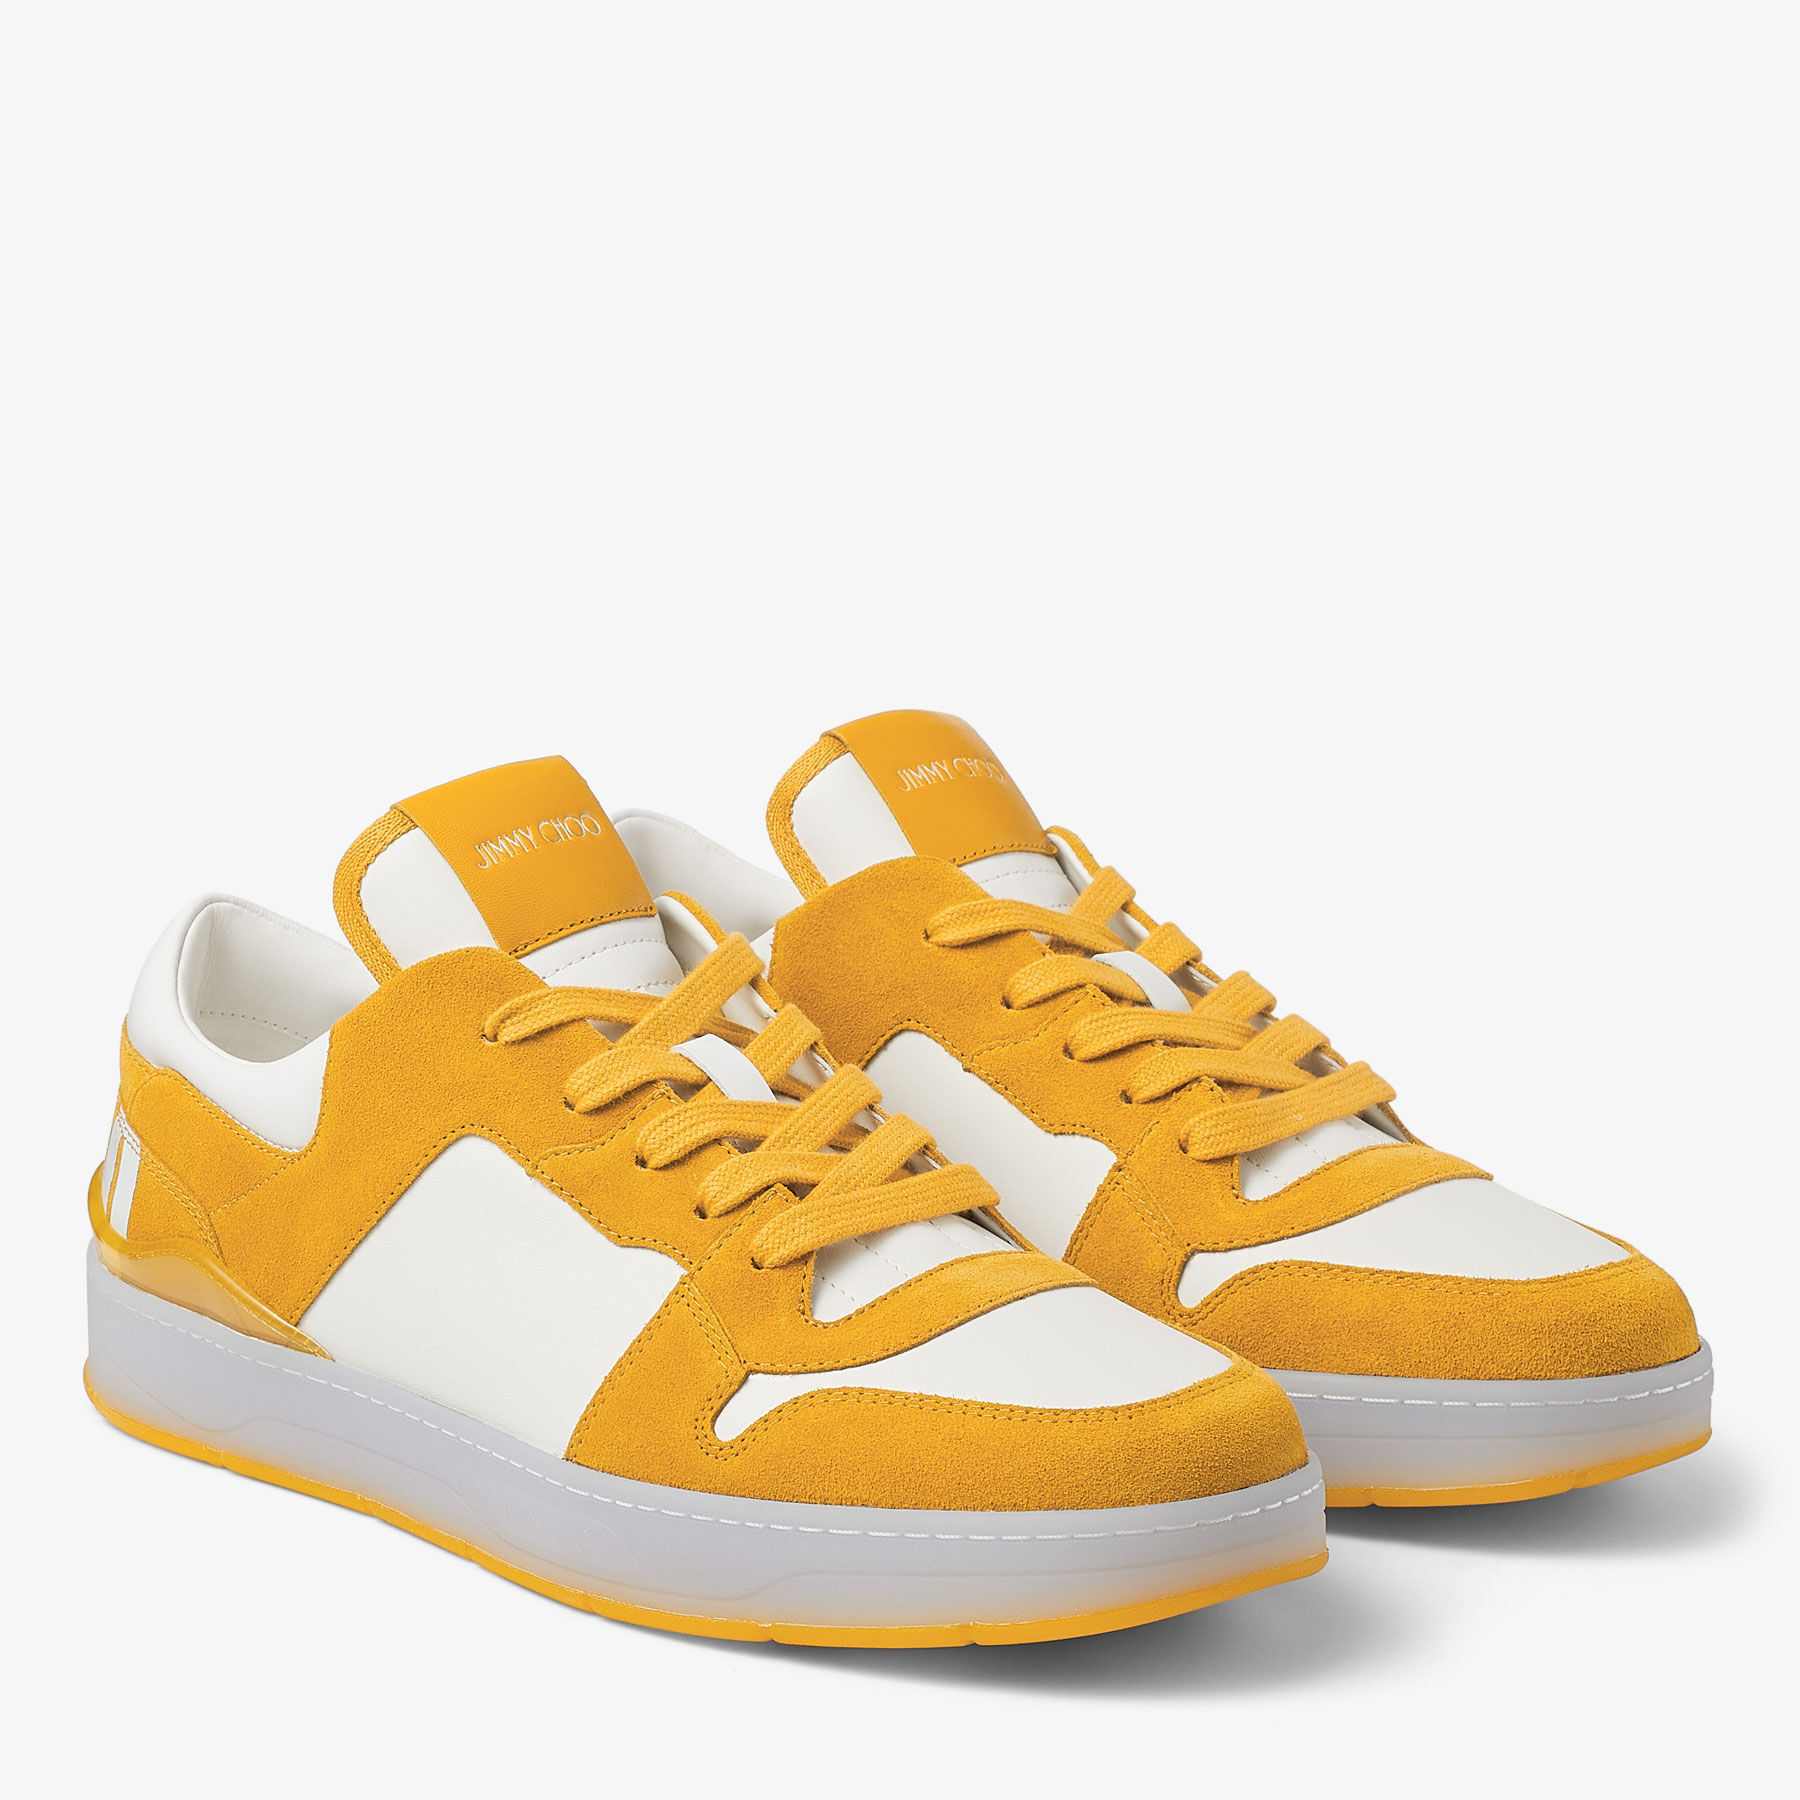 Gucci Gold & White Mac80 Sneakers - 8044 King Gold/gr.wh | Editorialist